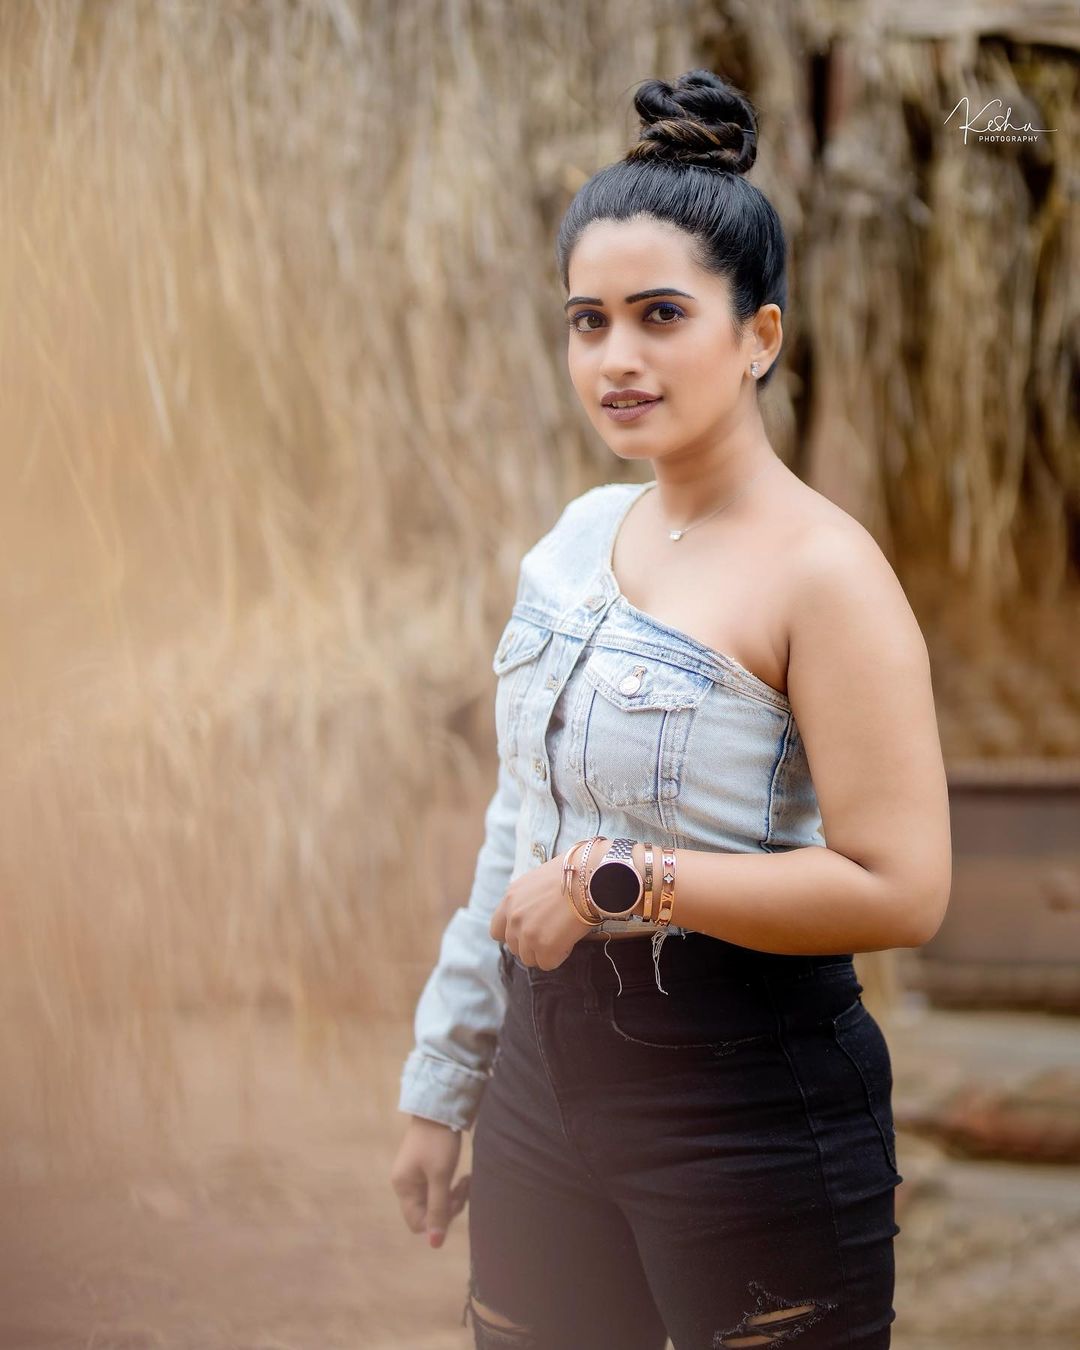 Actress sravanthi looking hot in this trendy outfit-Sravanthi Photos,Spicy Hot Pics,Images,High Resolution WallPapers Download